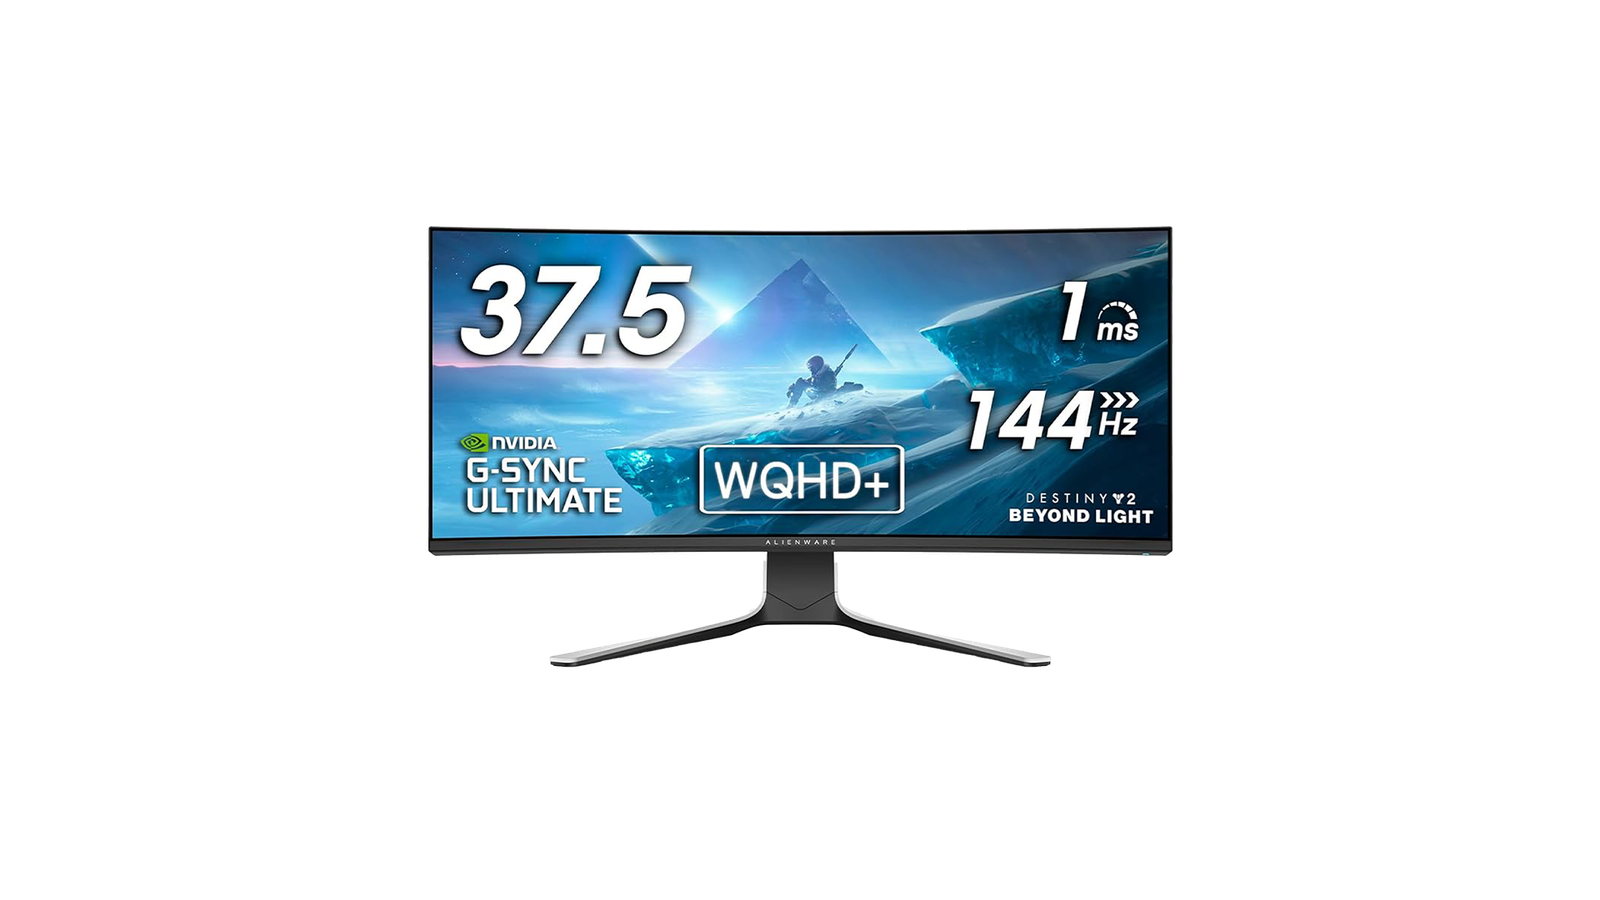 Dell Alienware AW3821DW - The best ultrawide gaming monitor.